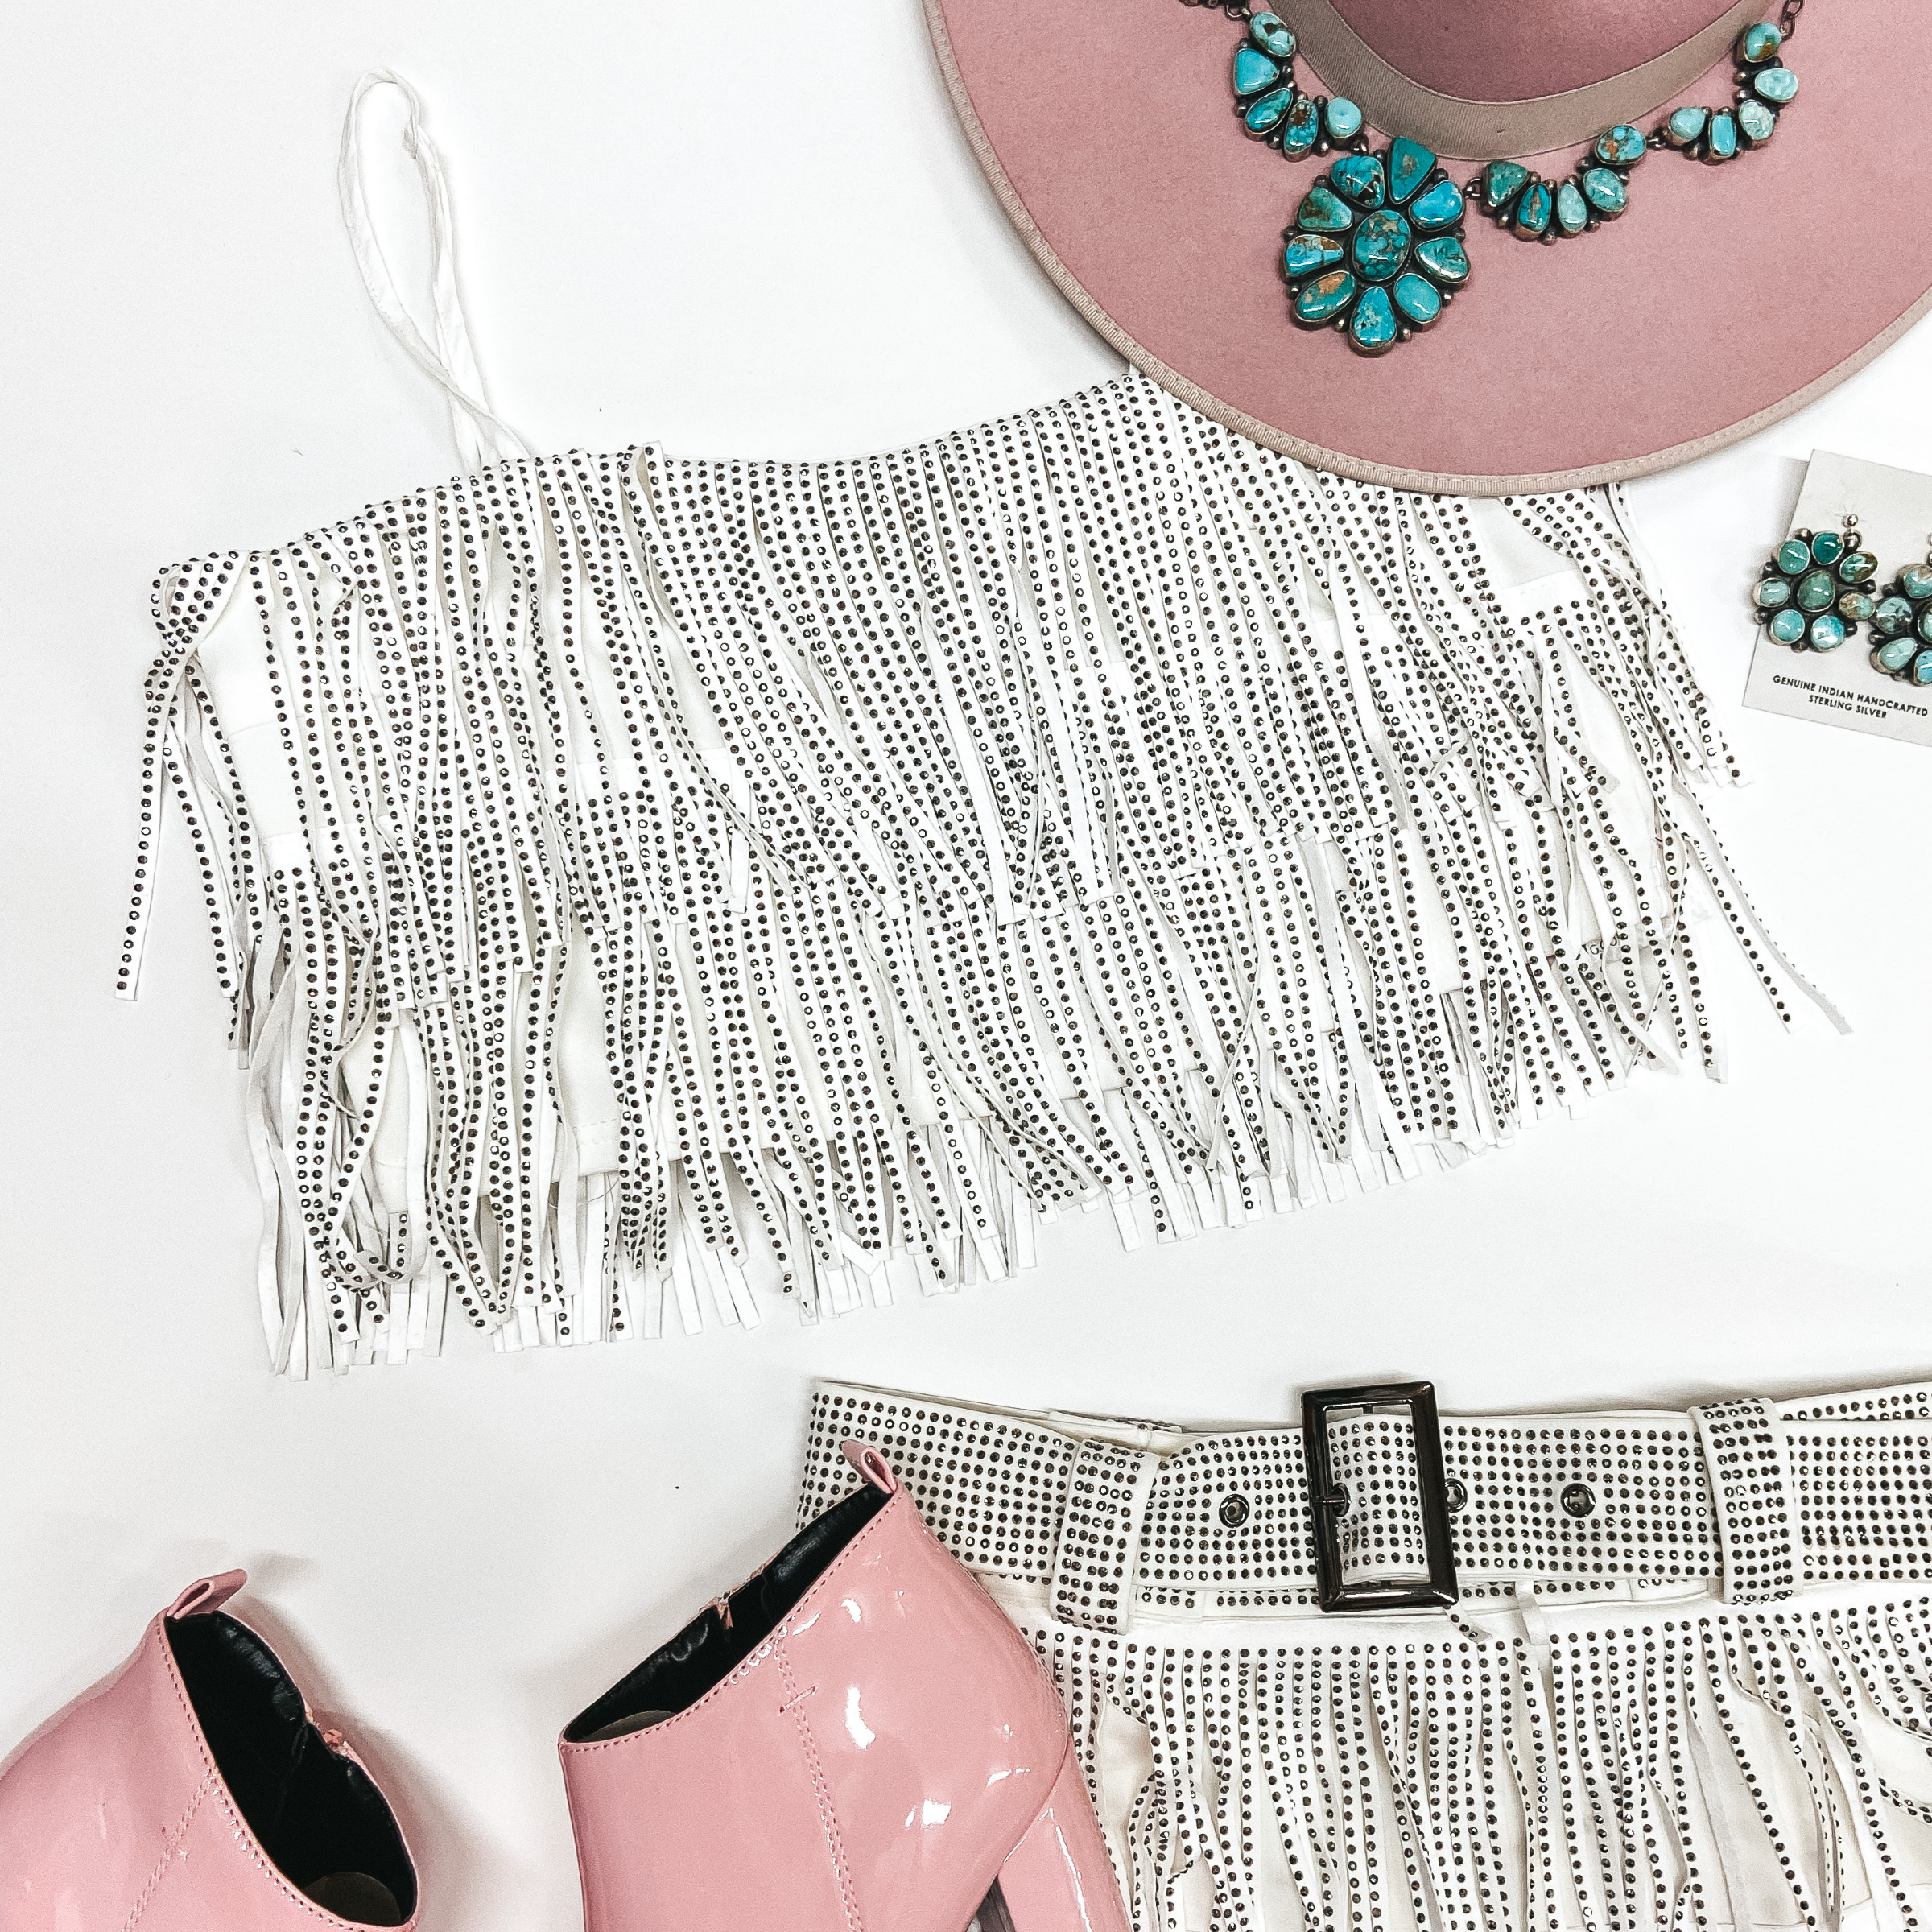 A white crystal fringe crop top with adjustable spaghetti straps pictured on a white background with a pink hat, pink booties, and turquoise jewelry.